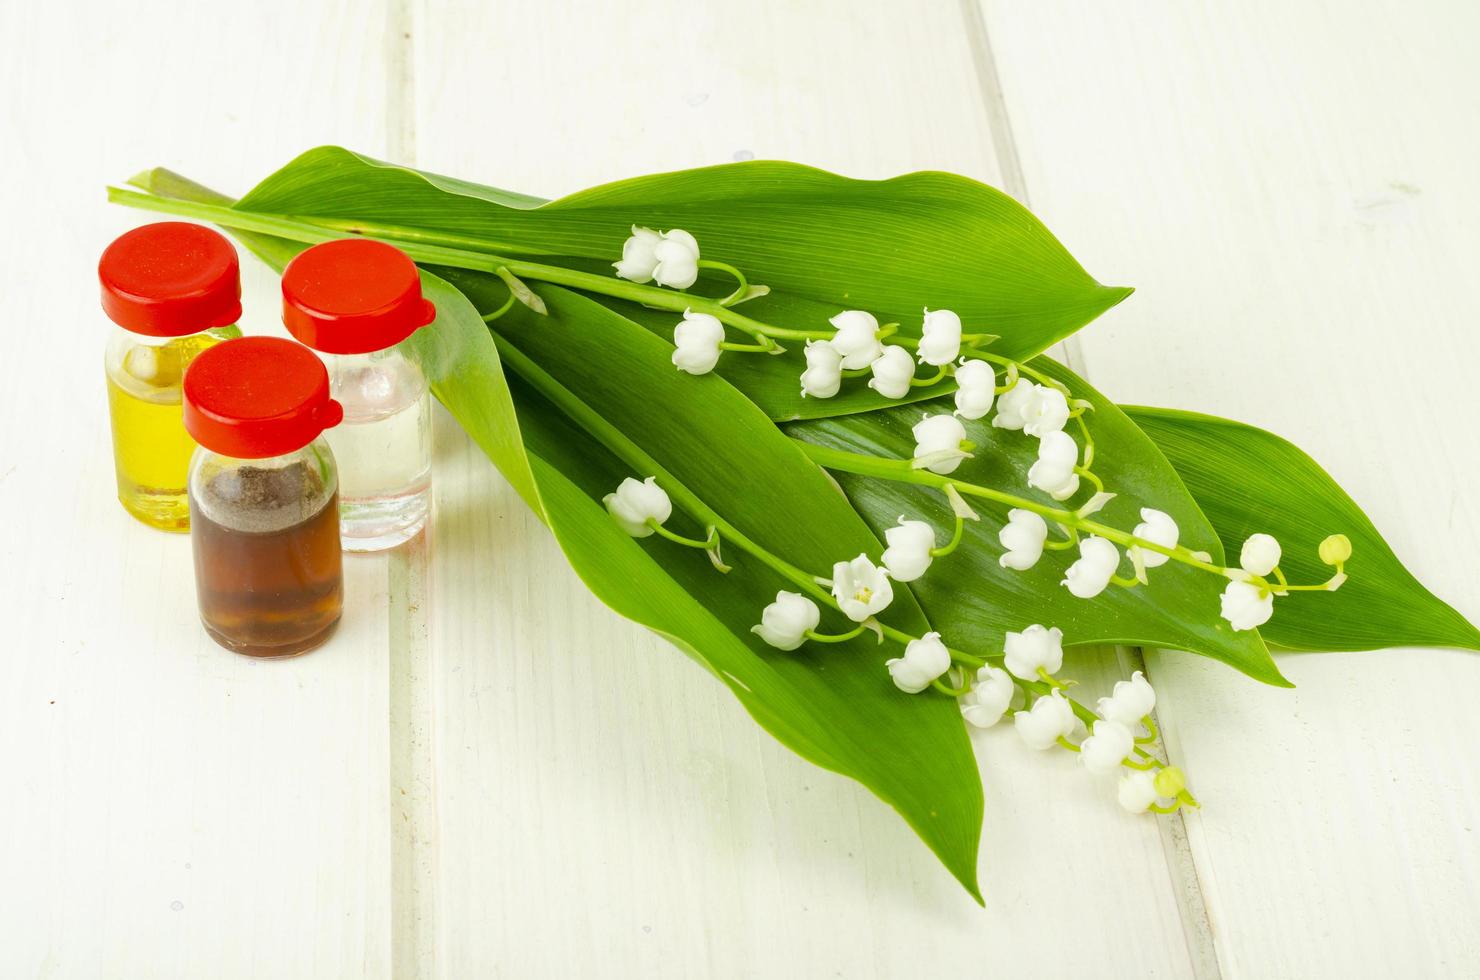 Lily of the valley, essential oil, extract, tincture, infusion, remedy, herbal capsules. Fresh flowers Convallaria majalis photo